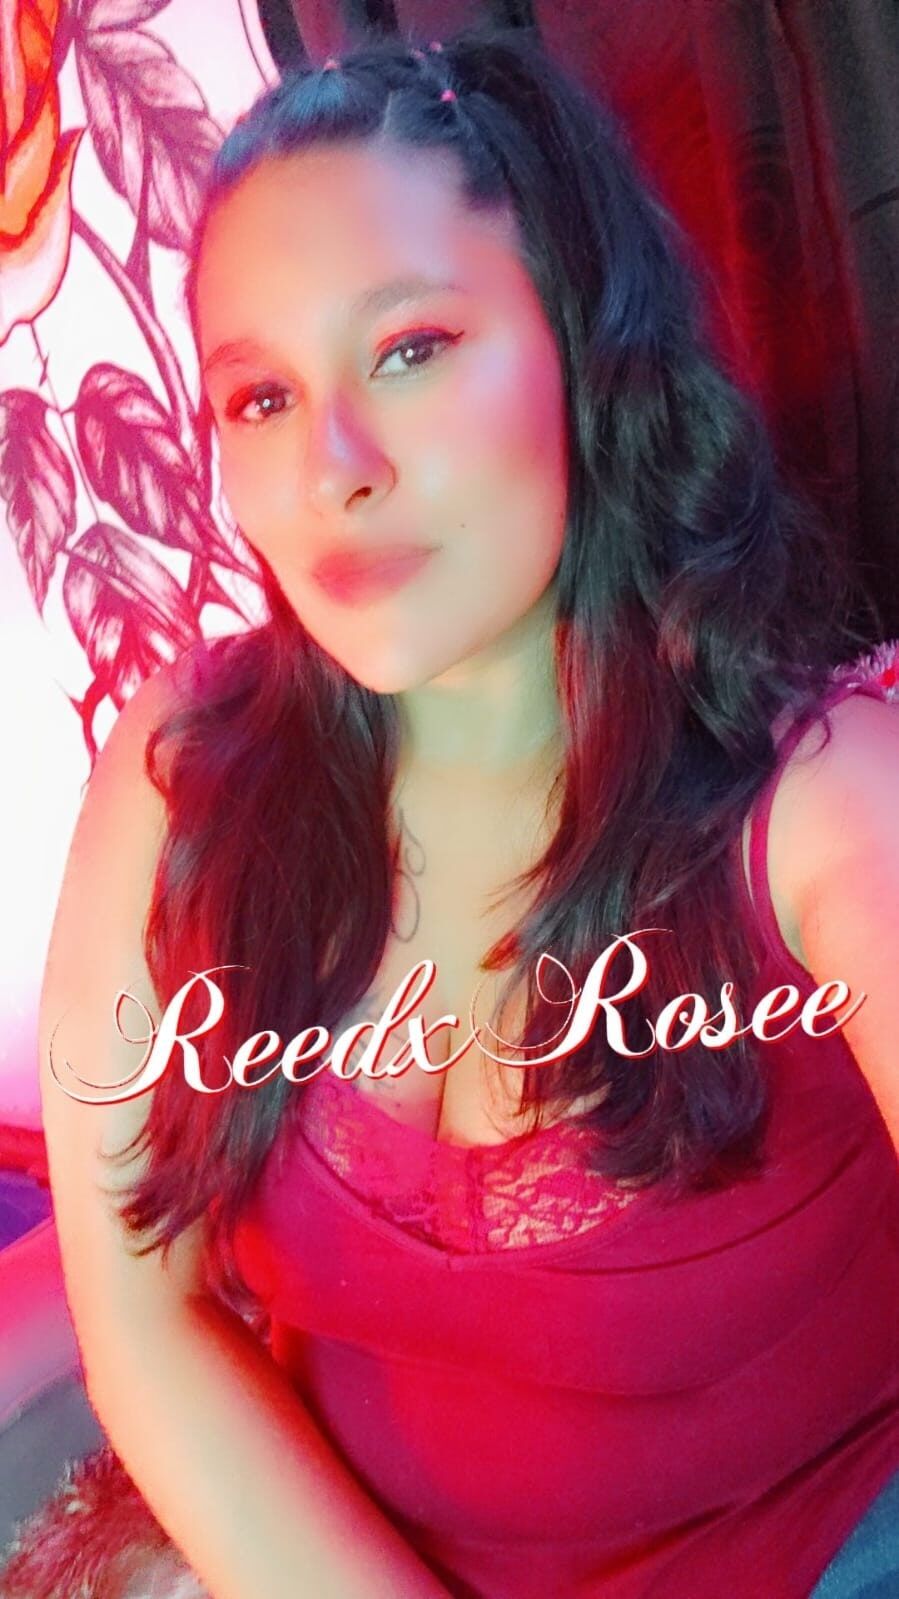 search on live camera and we have fun together ReedxRosee #3